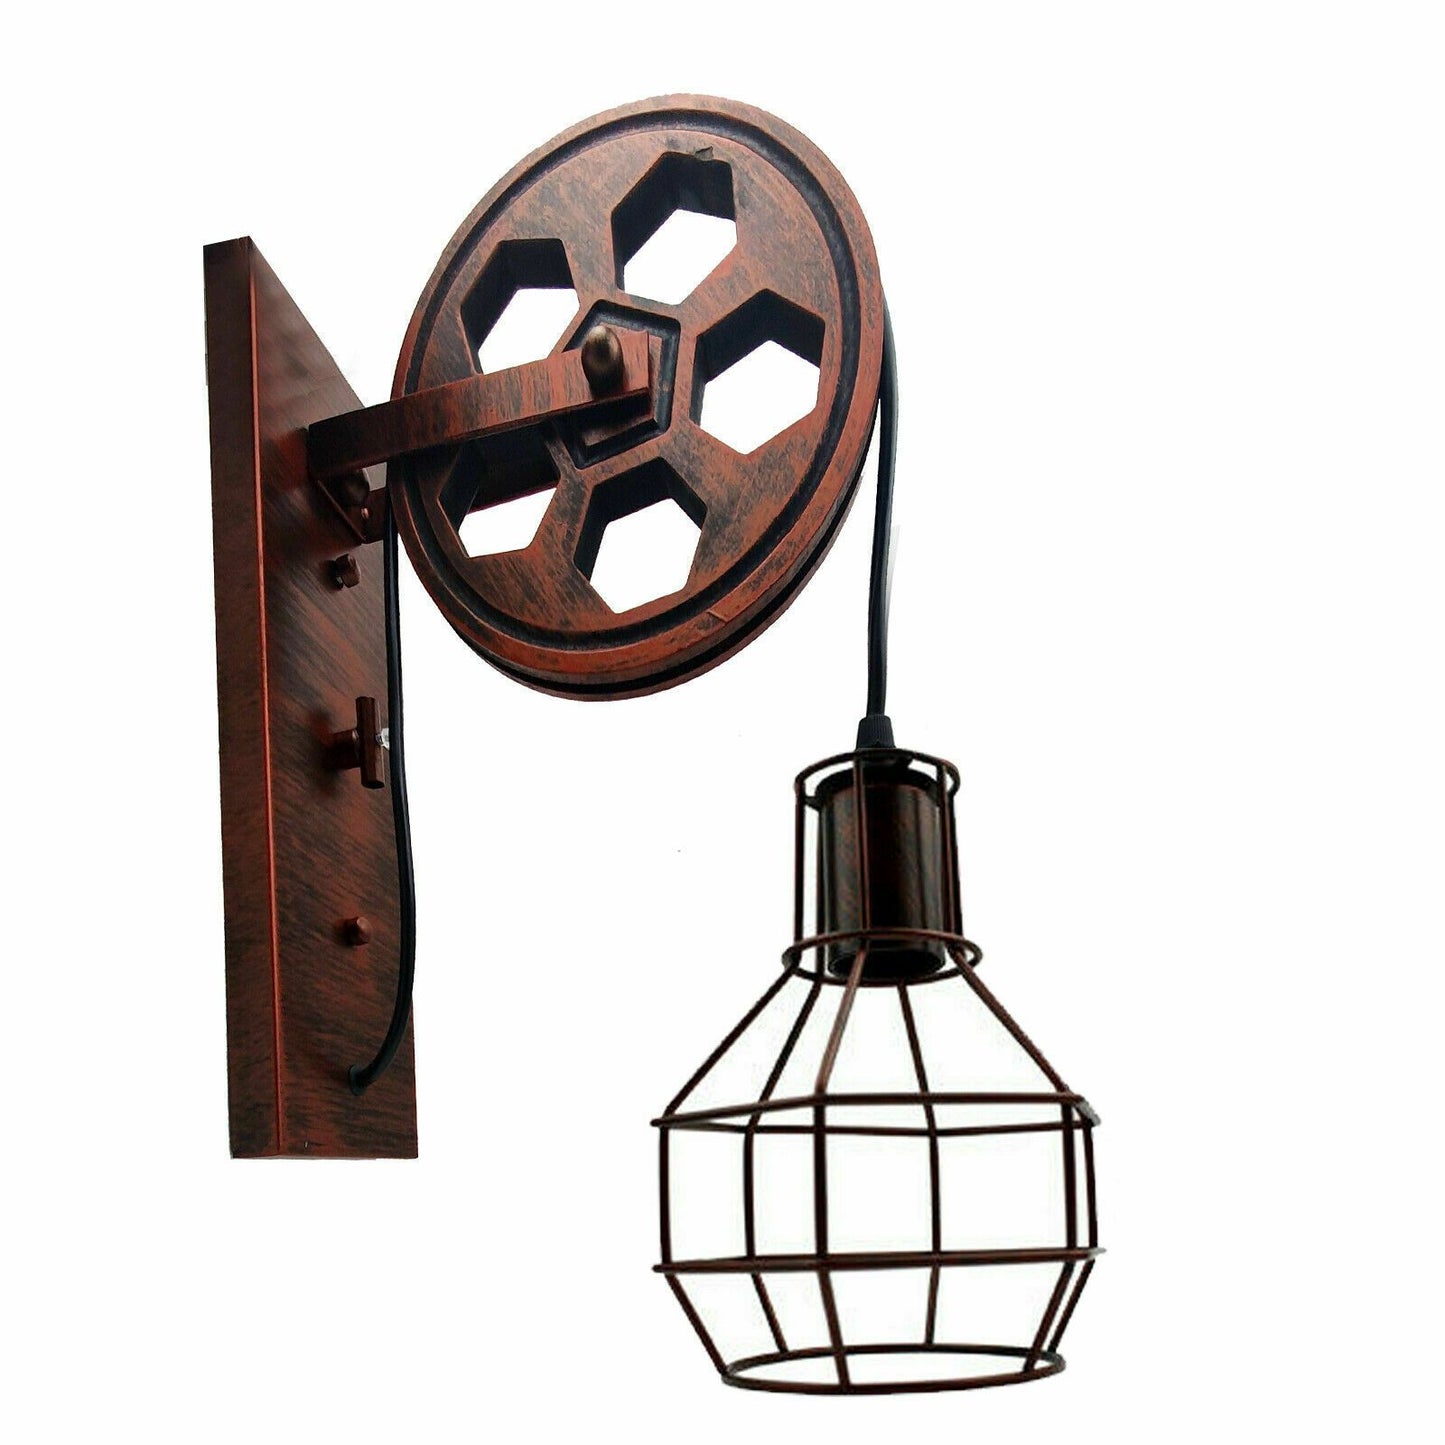 Rustic Retro Wall Lamp with Wheel Design - Vintage Industrial Lighting, E27 Lamp Holder